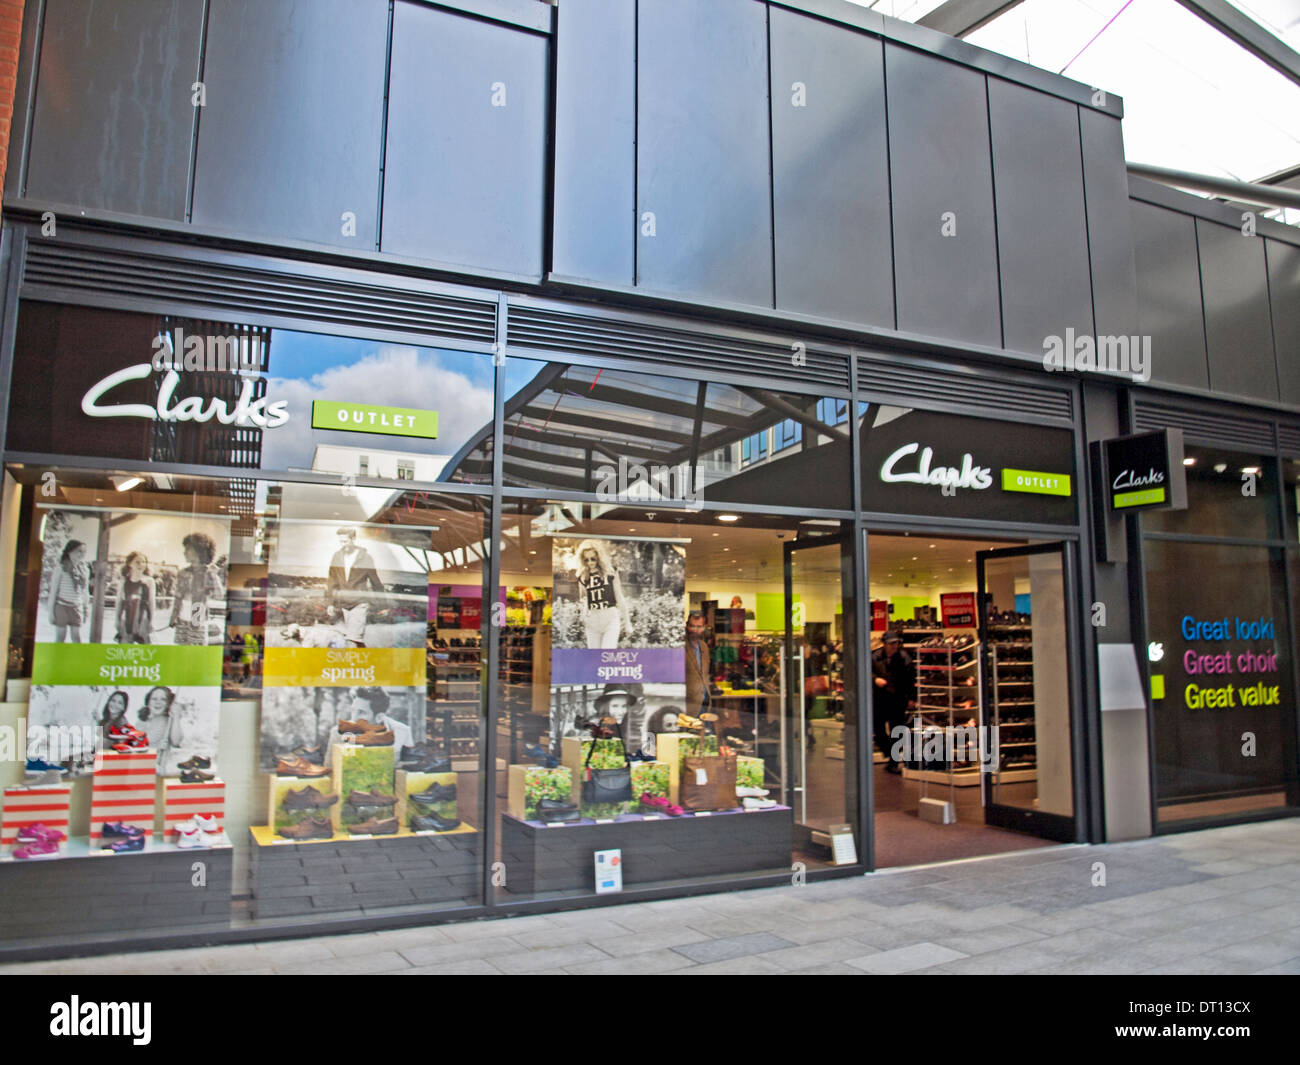 clarks outlet ireland